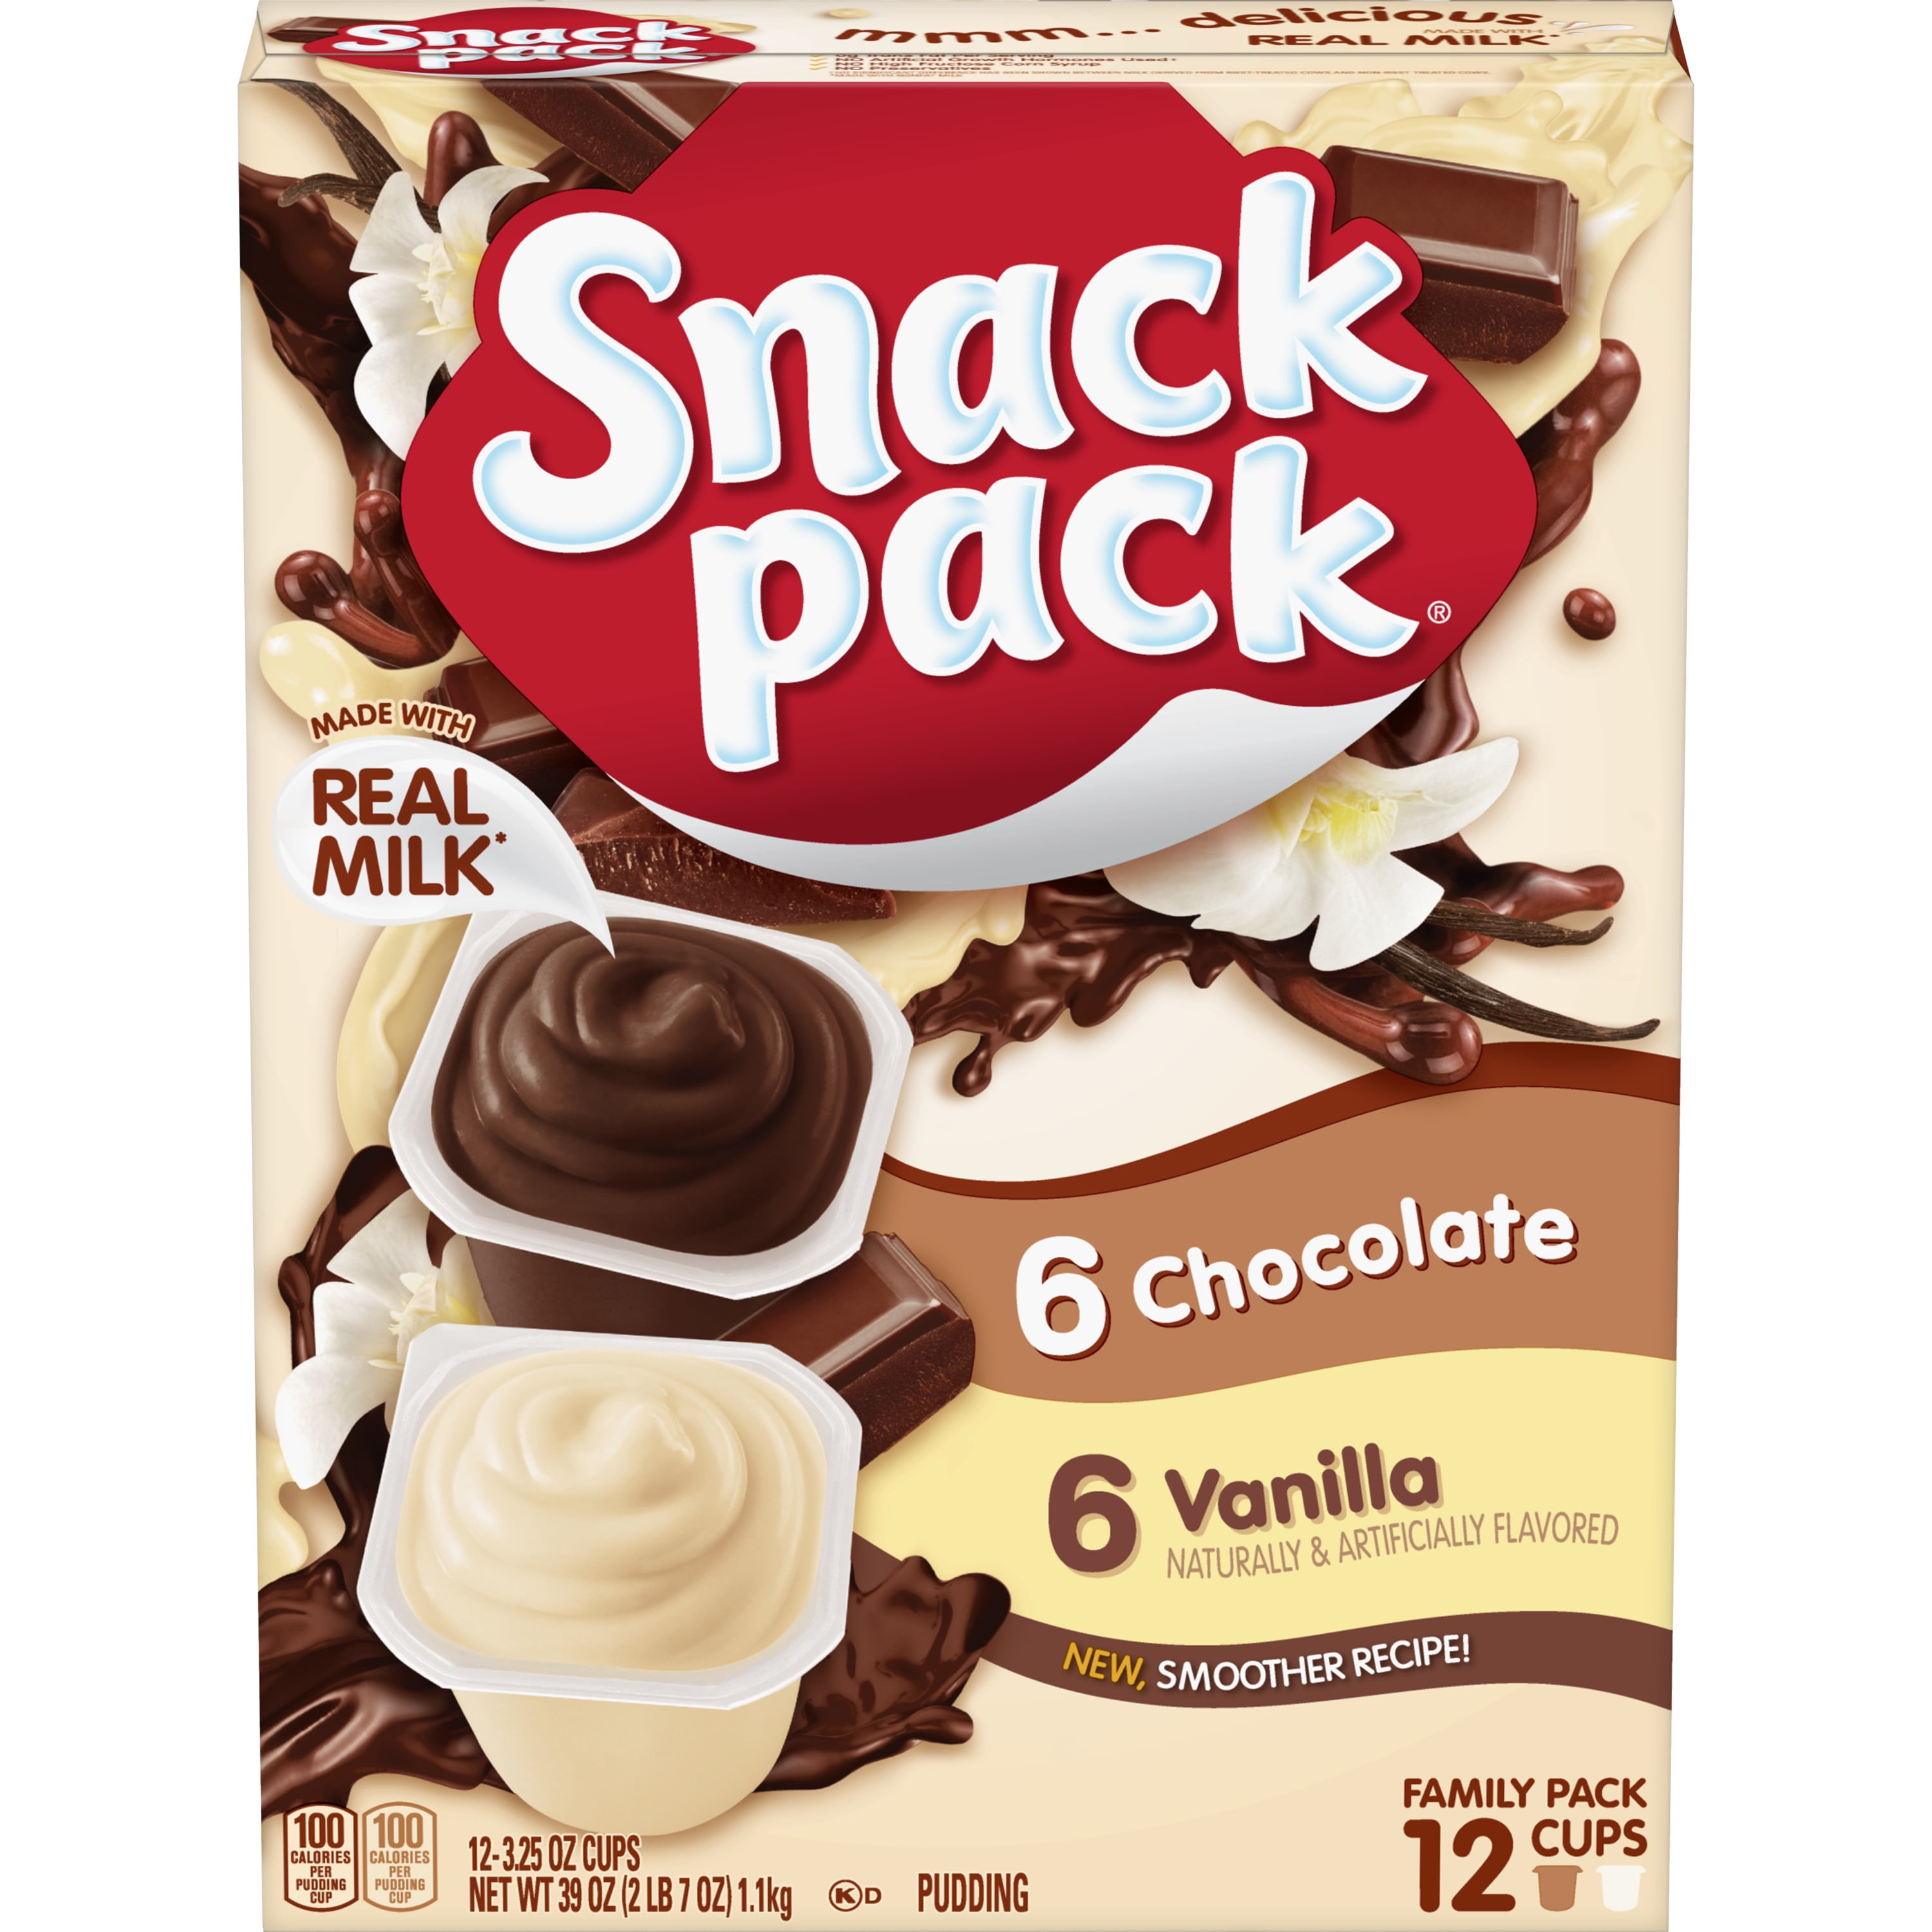 Snack Pack Chocolate and Vanilla Flavored Pudding Cups Family Pack, 12 Count Pudding Cups (6 Pack)